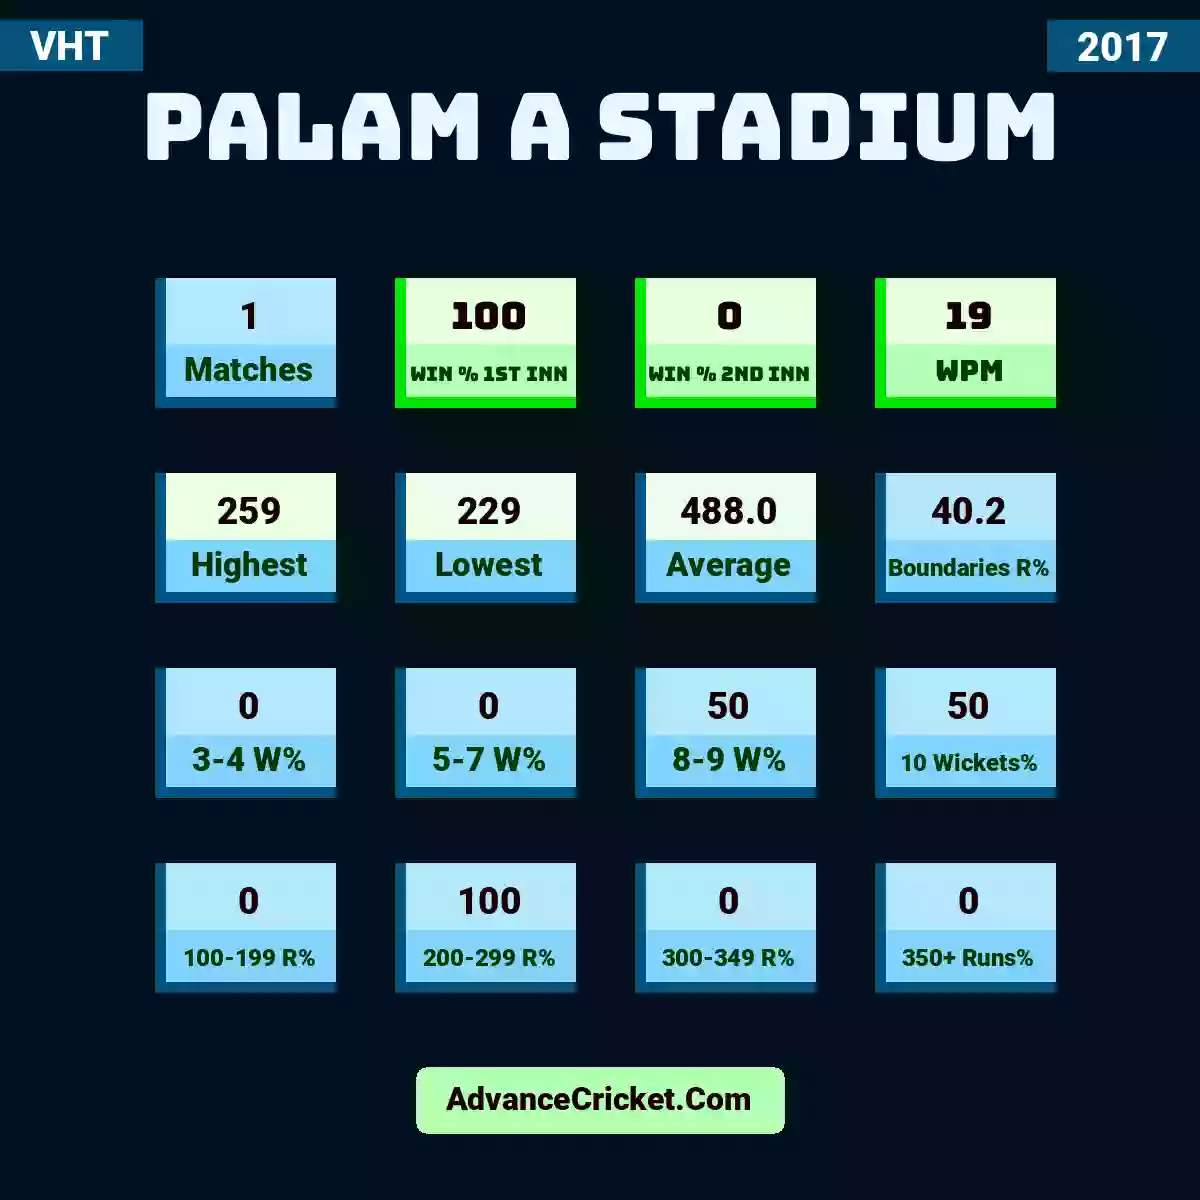 Image showing Palam A Stadium with Matches: 1, Win % 1st Inn: 100, Win % 2nd Inn: 0, WPM: 19, Highest: 259, Lowest: 229, Average: 488.0, Boundaries R%: 40.2, 3-4 W%: 0, 5-7 W%: 0, 8-9 W%: 50, 10 Wickets%: 50, 100-199 R%: 0, 200-299 R%: 100, 300-349 R%: 0, 350+ Runs%: 0.